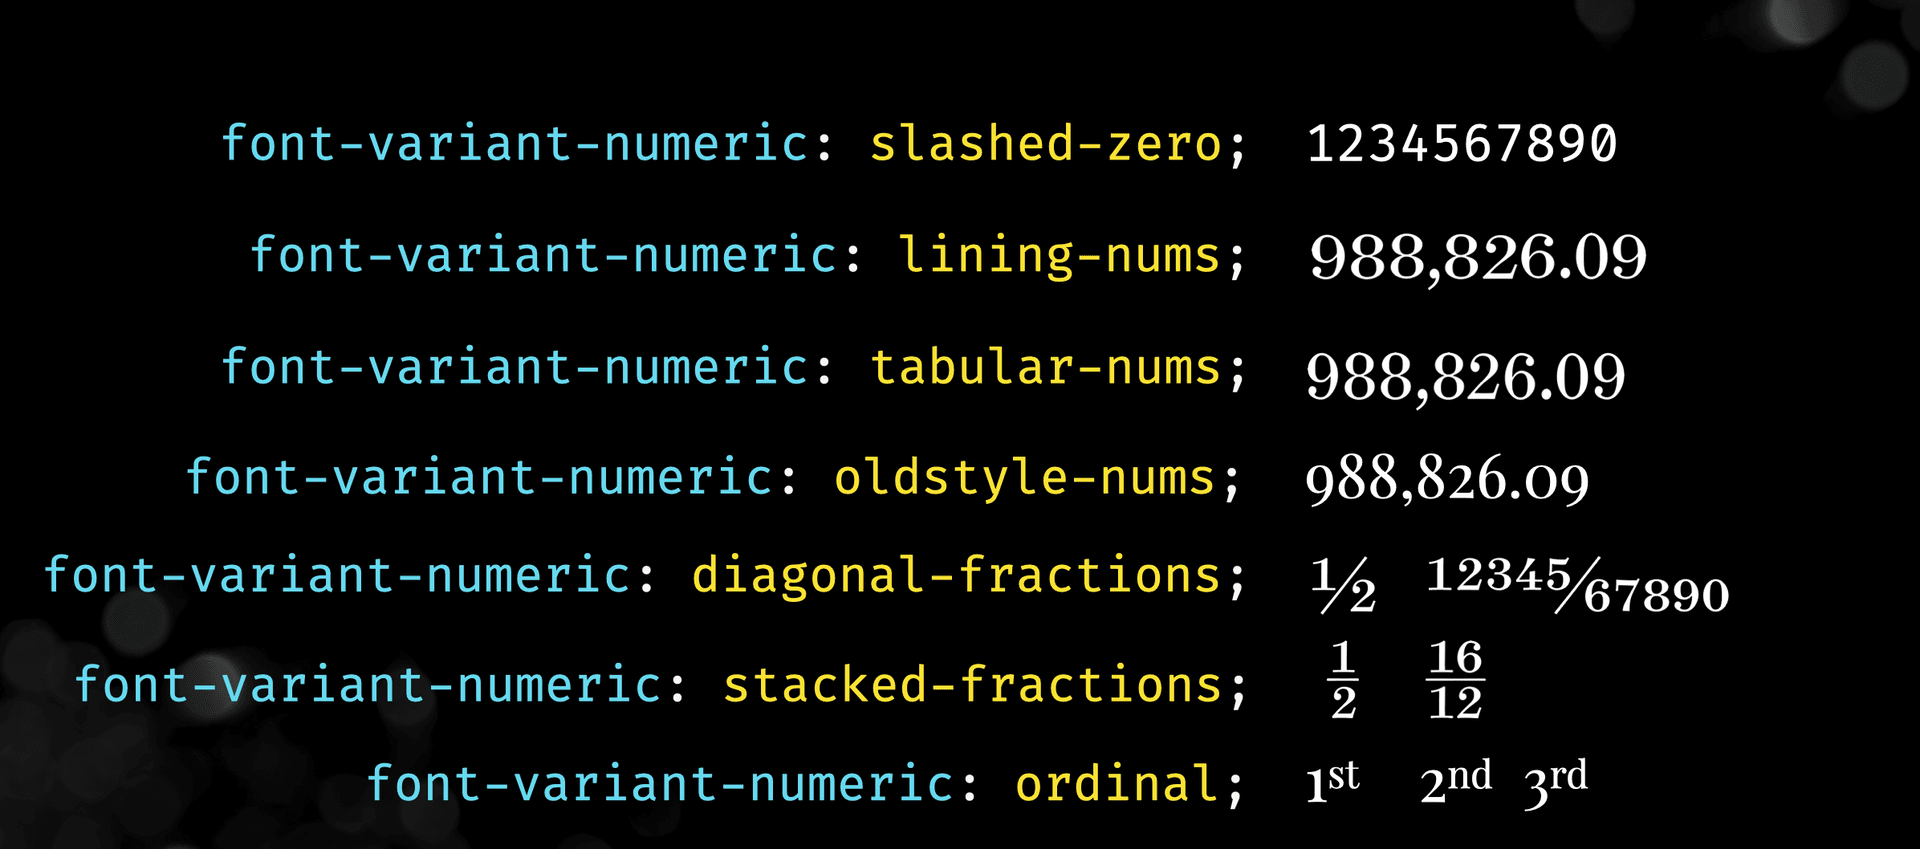 Example different font-variant-numeric features based on list above.